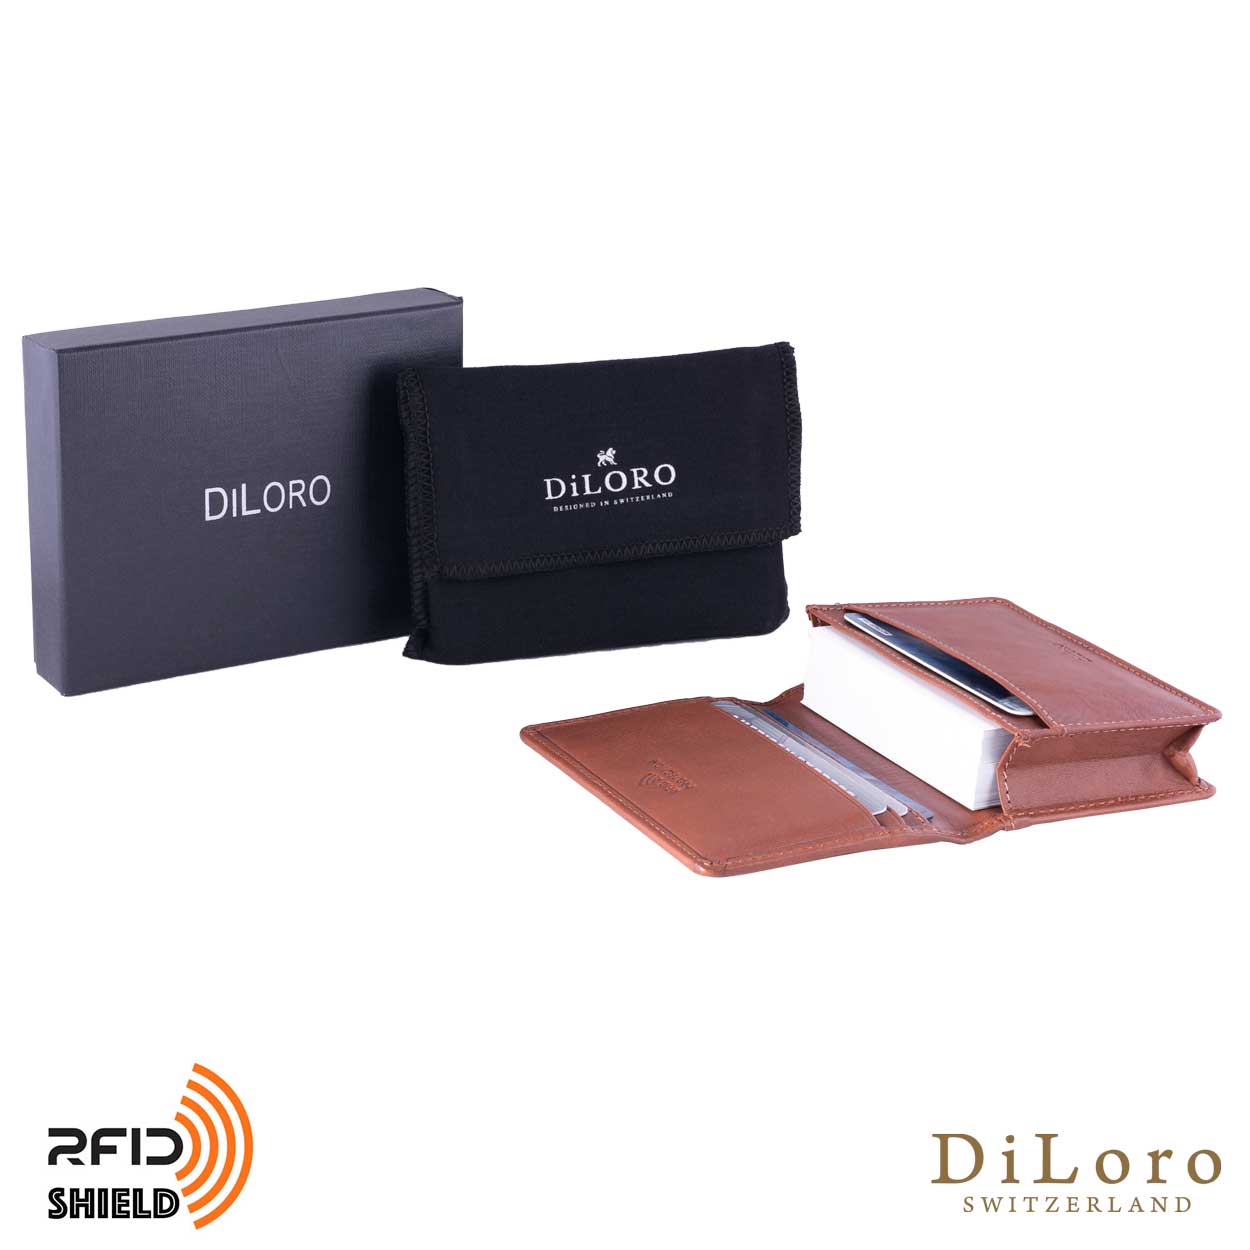 DiLoro Italy RFID Blocking Bifold Slim Genuine Leather Business Card Wallet Bugatti Tan - Open, Inside View with DiLoro Gift Box and Dust Bag